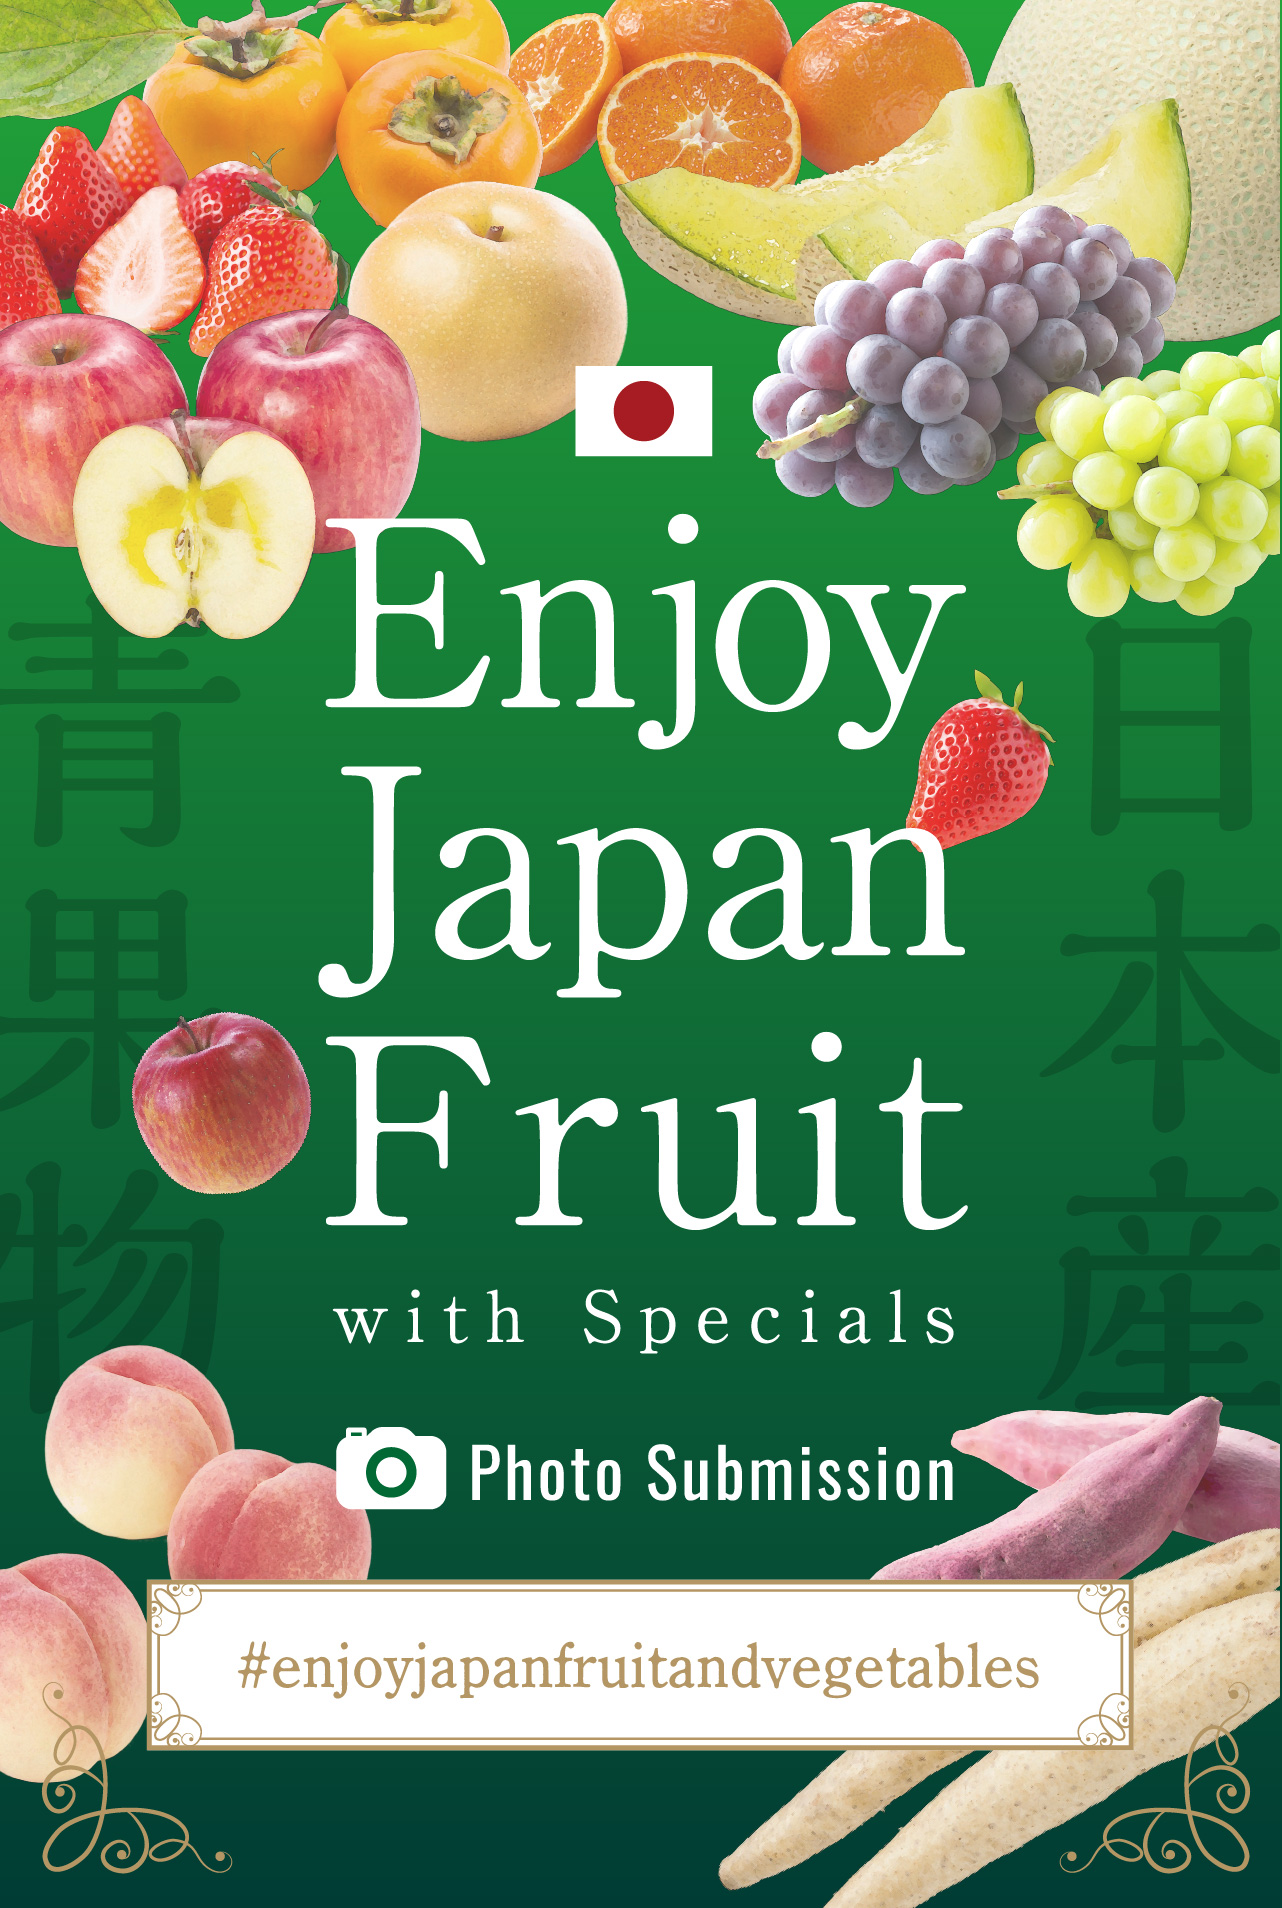 Enjoy Japan Fruit with Specials